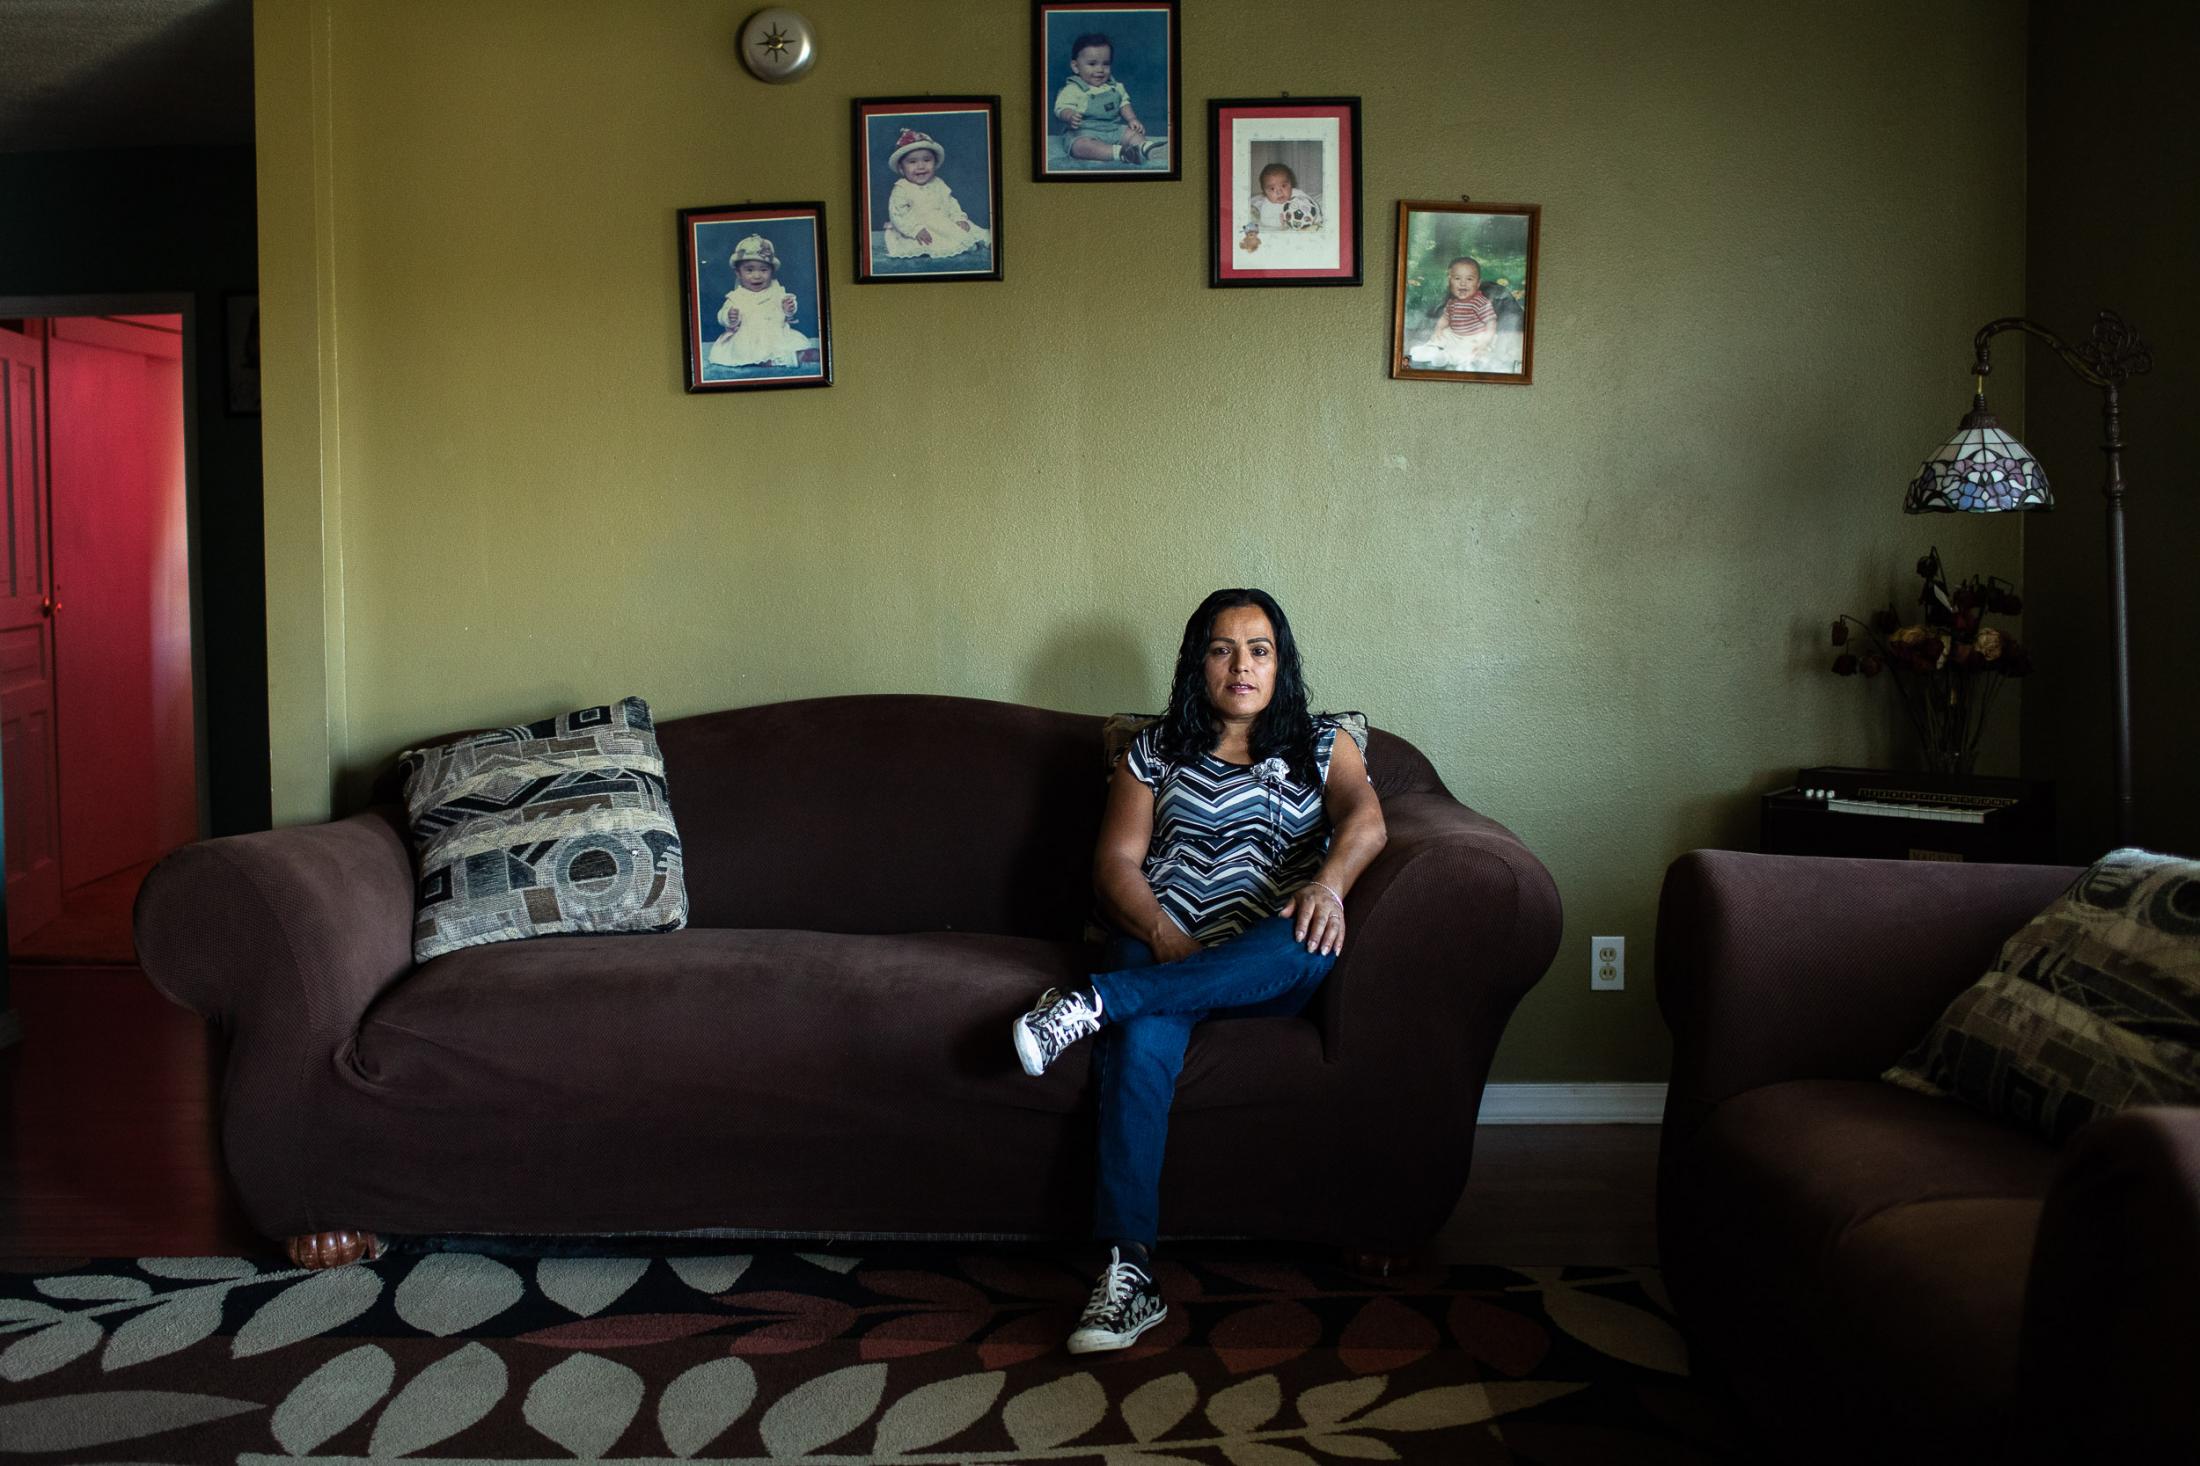  Fidelia Morales sit&#39;s in the family living room below the pictures of her 5 childern. The mother of five moved to the area about 12 years ago, and quickly became concerned about pesticides drifting onto her property. &ldquo;But I did not really know how dangerous the chemicals were.&rdquo; She eventually learned of the troubling science. Photographed on assignment for The Guardian 